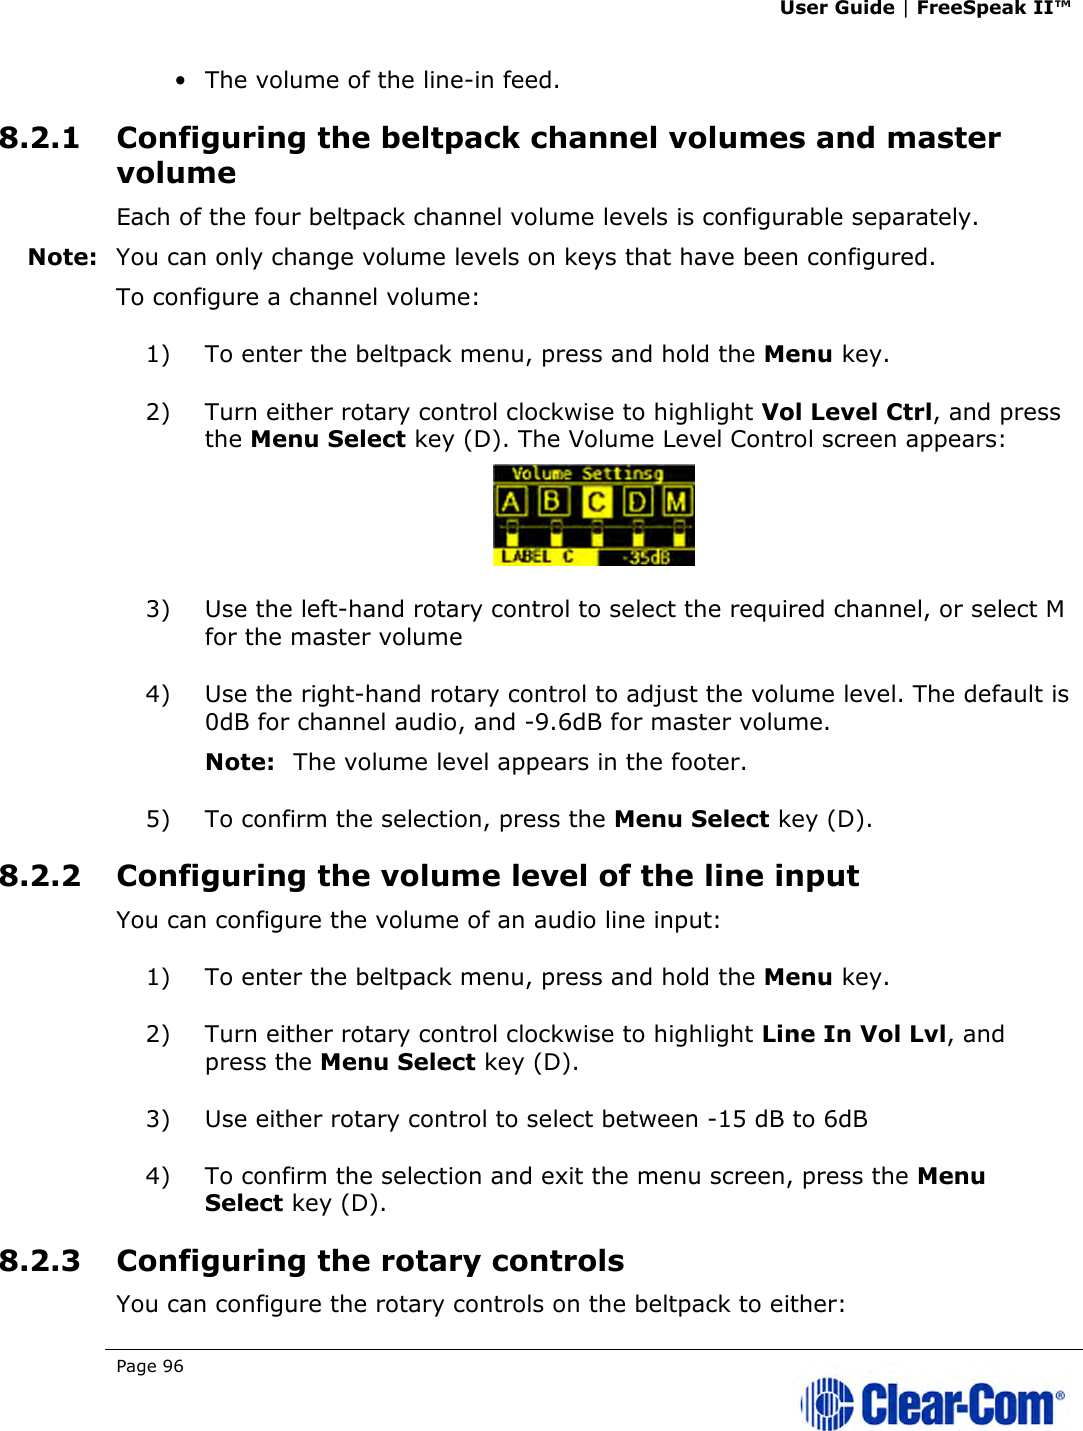 User Guide | FreeSpeak II™  Page 96   • The volume of the line-in feed. 8.2.1 Configuring the beltpack channel volumes and master volume Each of the four beltpack channel volume levels is configurable separately. Note: You can only change volume levels on keys that have been configured. To configure a channel volume: 1) To enter the beltpack menu, press and hold the Menu key. 2) Turn either rotary control clockwise to highlight Vol Level Ctrl, and press the Menu Select key (D). The Volume Level Control screen appears:  3) Use the left-hand rotary control to select the required channel, or select M for the master volume 4) Use the right-hand rotary control to adjust the volume level. The default is 0dB for channel audio, and -9.6dB for master volume. Note: The volume level appears in the footer. 5) To confirm the selection, press the Menu Select key (D). 8.2.2 Configuring the volume level of the line input You can configure the volume of an audio line input: 1) To enter the beltpack menu, press and hold the Menu key. 2) Turn either rotary control clockwise to highlight Line In Vol Lvl, and press the Menu Select key (D). 3) Use either rotary control to select between -15 dB to 6dB 4) To confirm the selection and exit the menu screen, press the Menu Select key (D). 8.2.3 Configuring the rotary controls You can configure the rotary controls on the beltpack to either: 